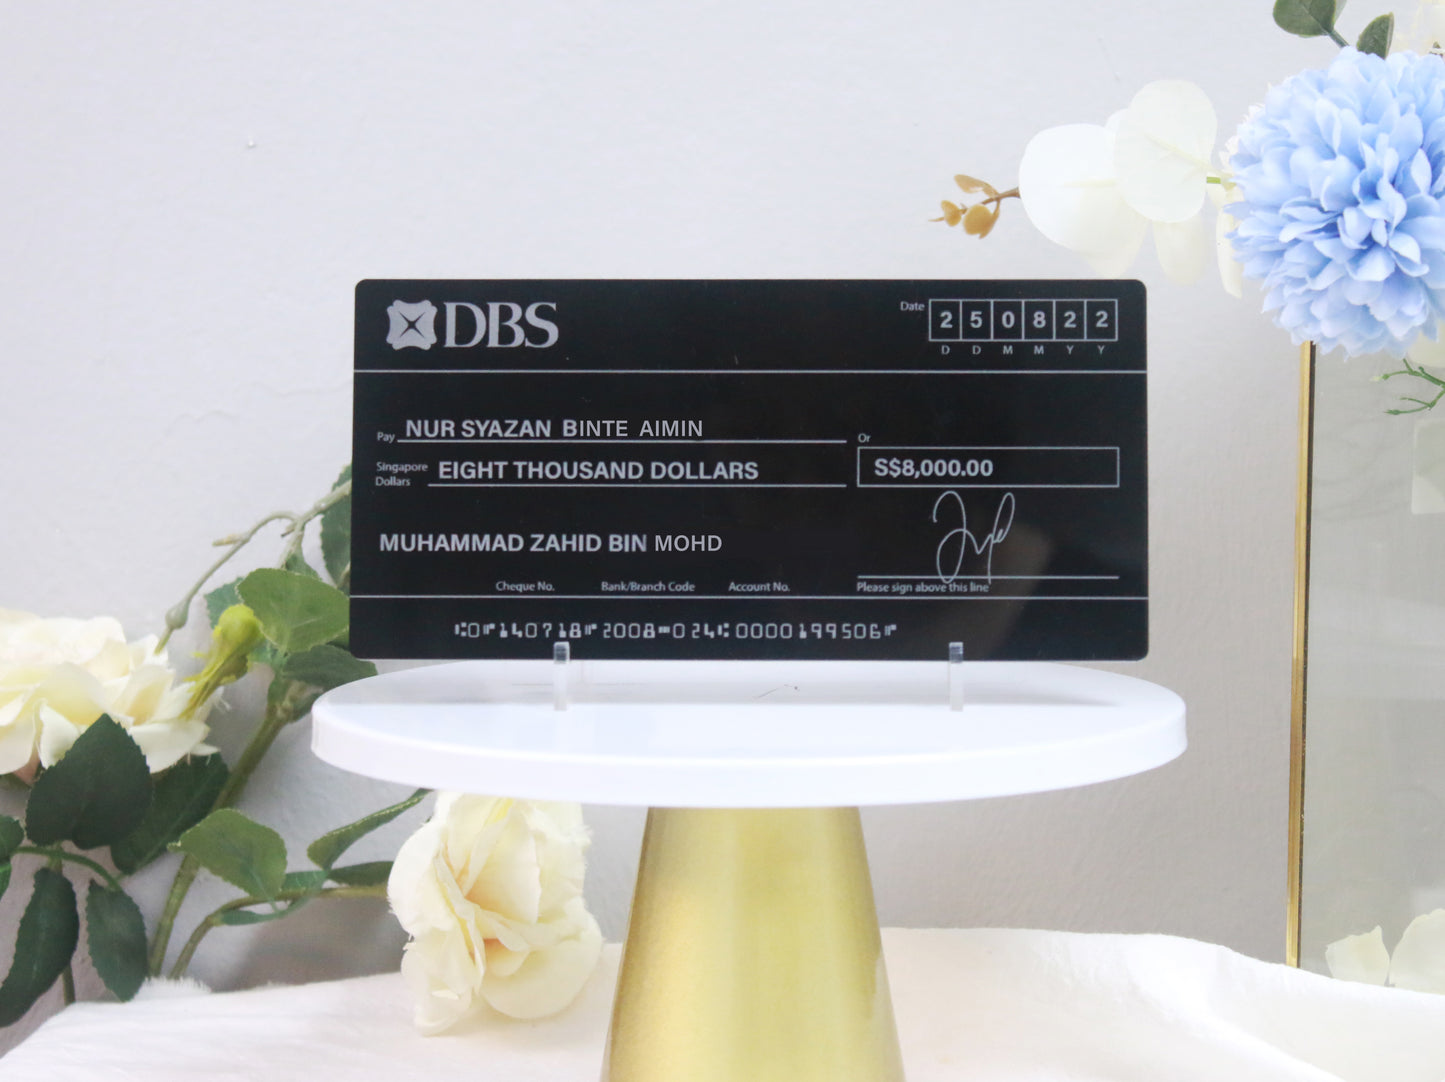 Glossy Black (White Printed Text) Mock up Cheque